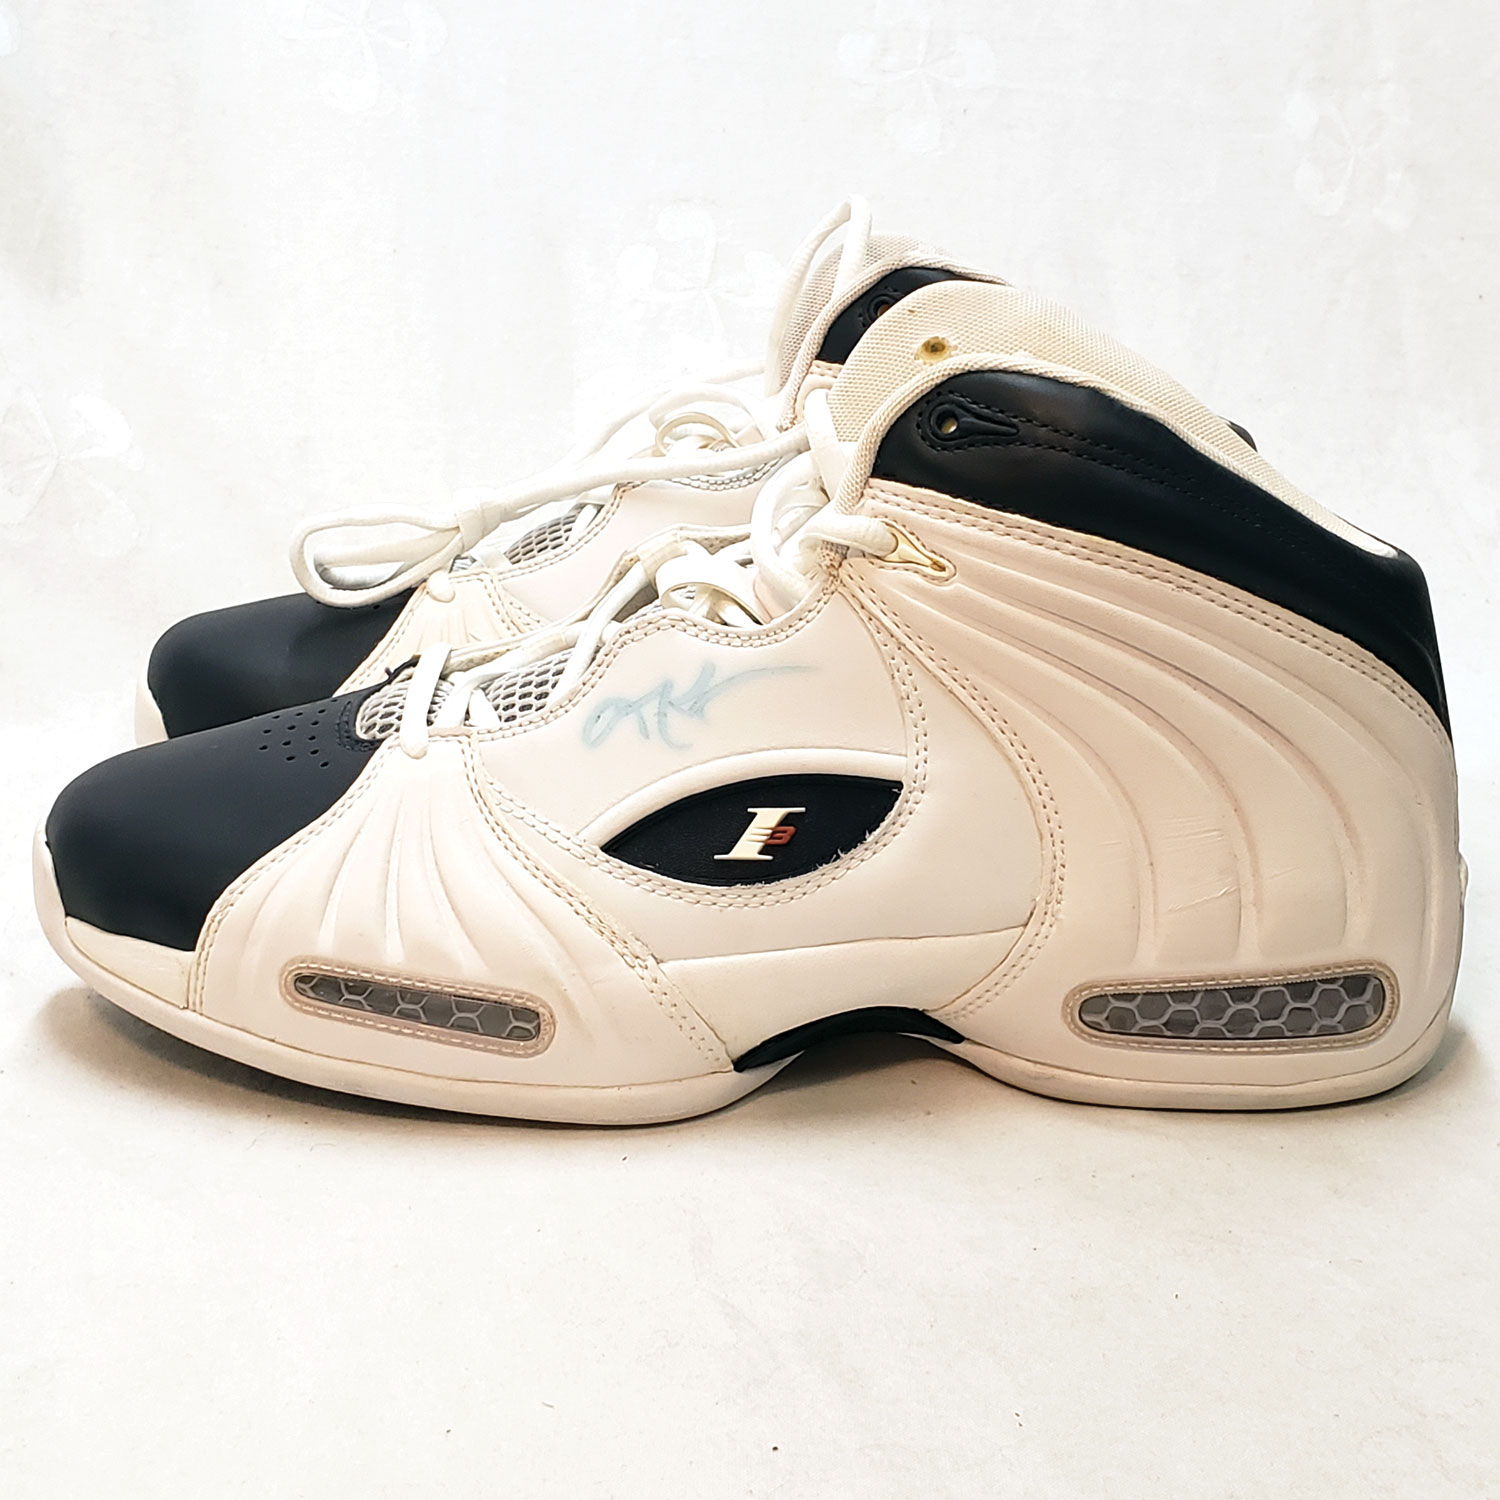 Allen Iverson Signed Game Worn Sneakers